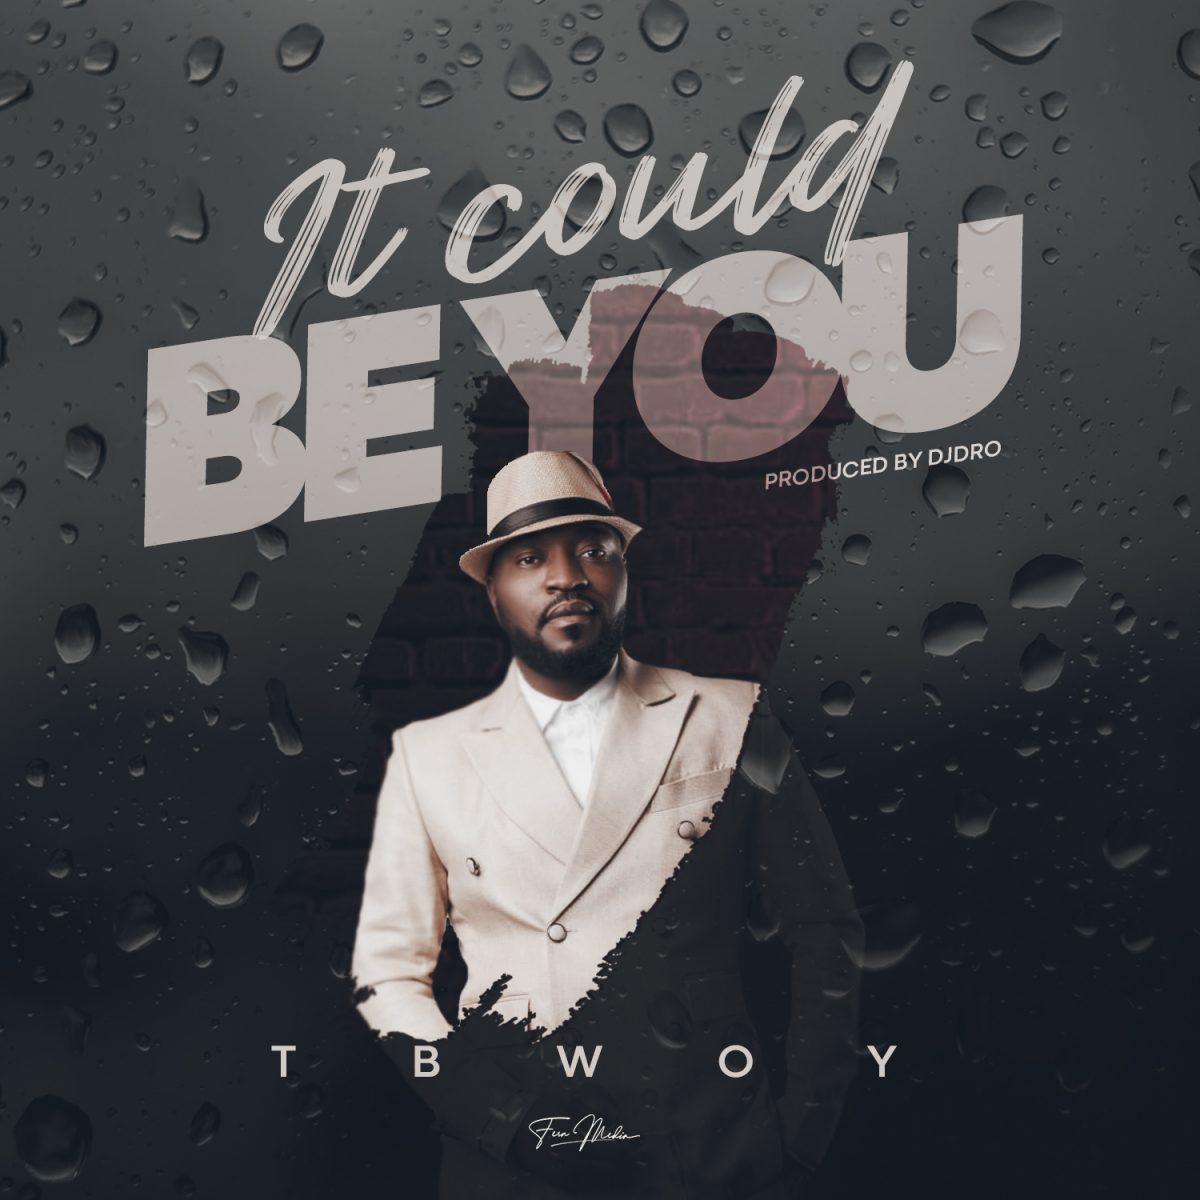 Tbwoy - "It Could Be You" Mp3